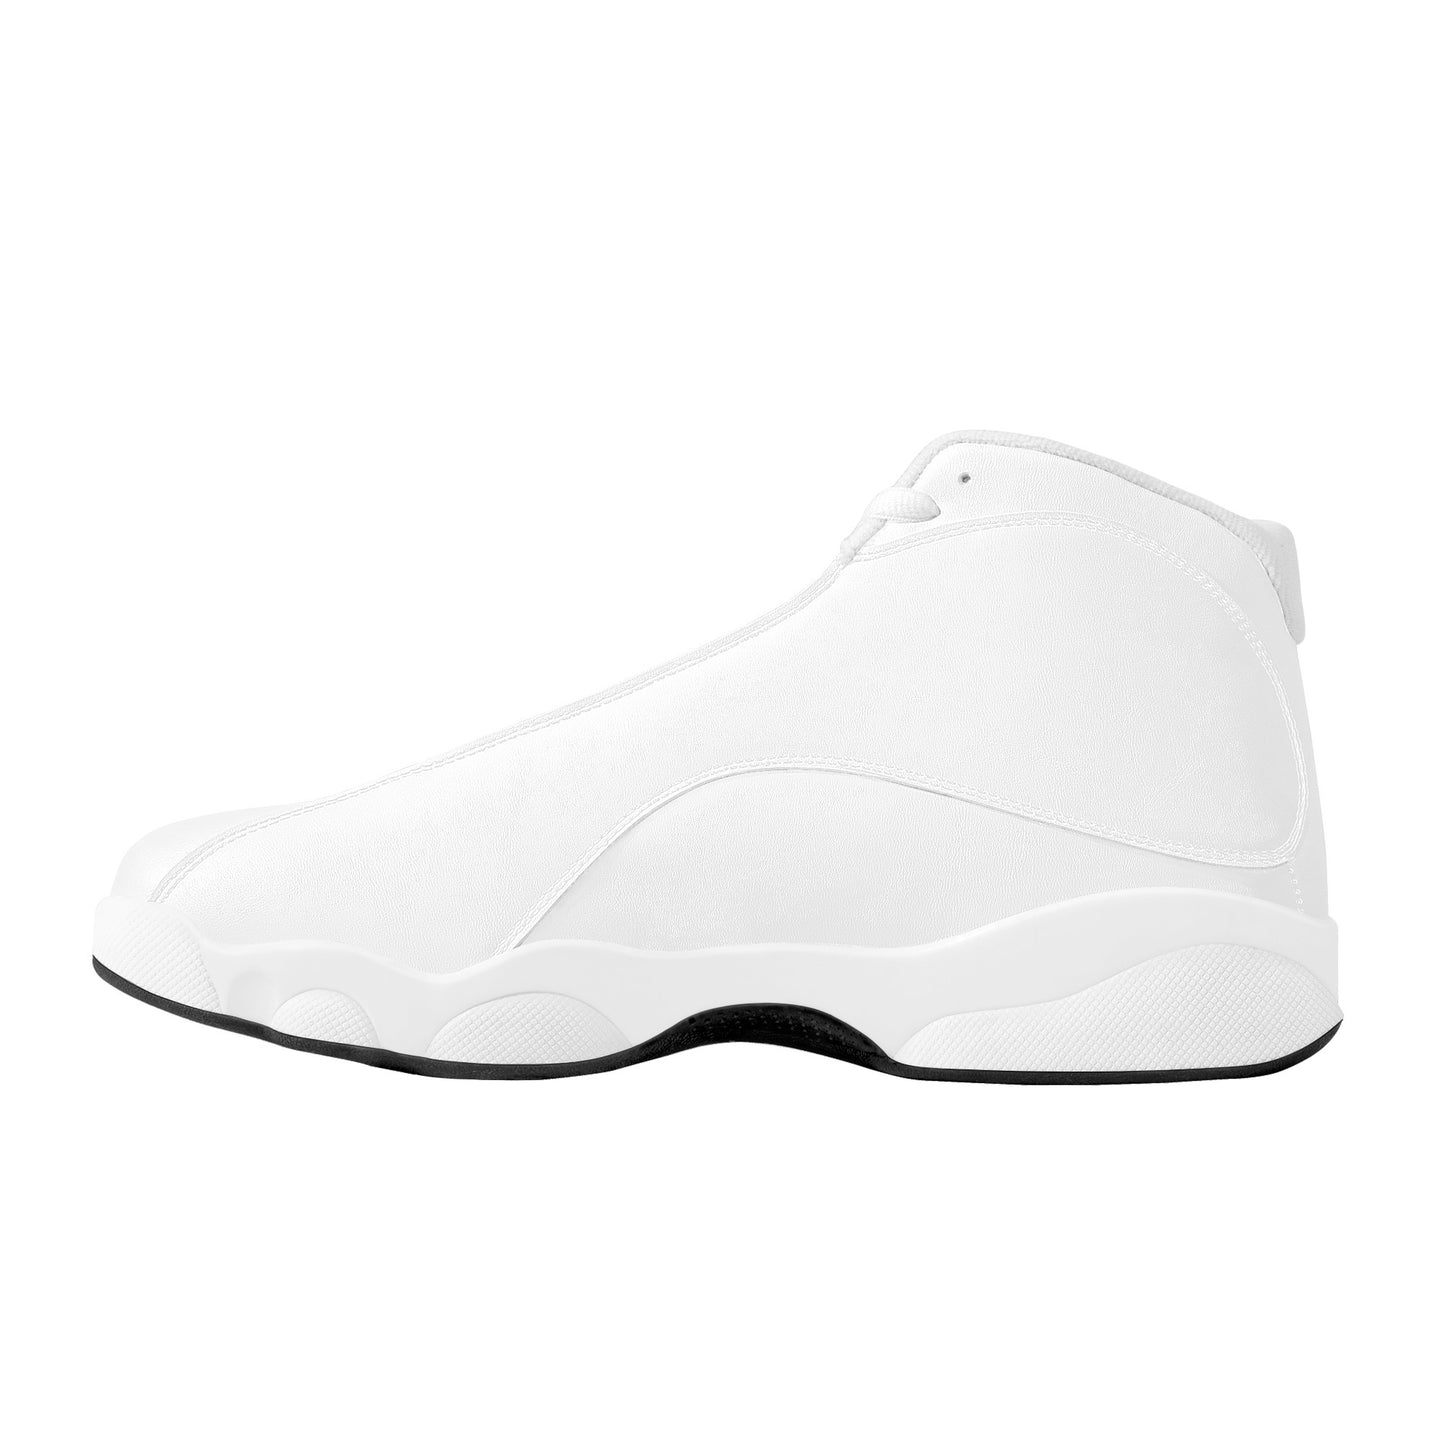 Create Your Own - Basketball Style Shoes - White - HayGoodies - basketball shoes